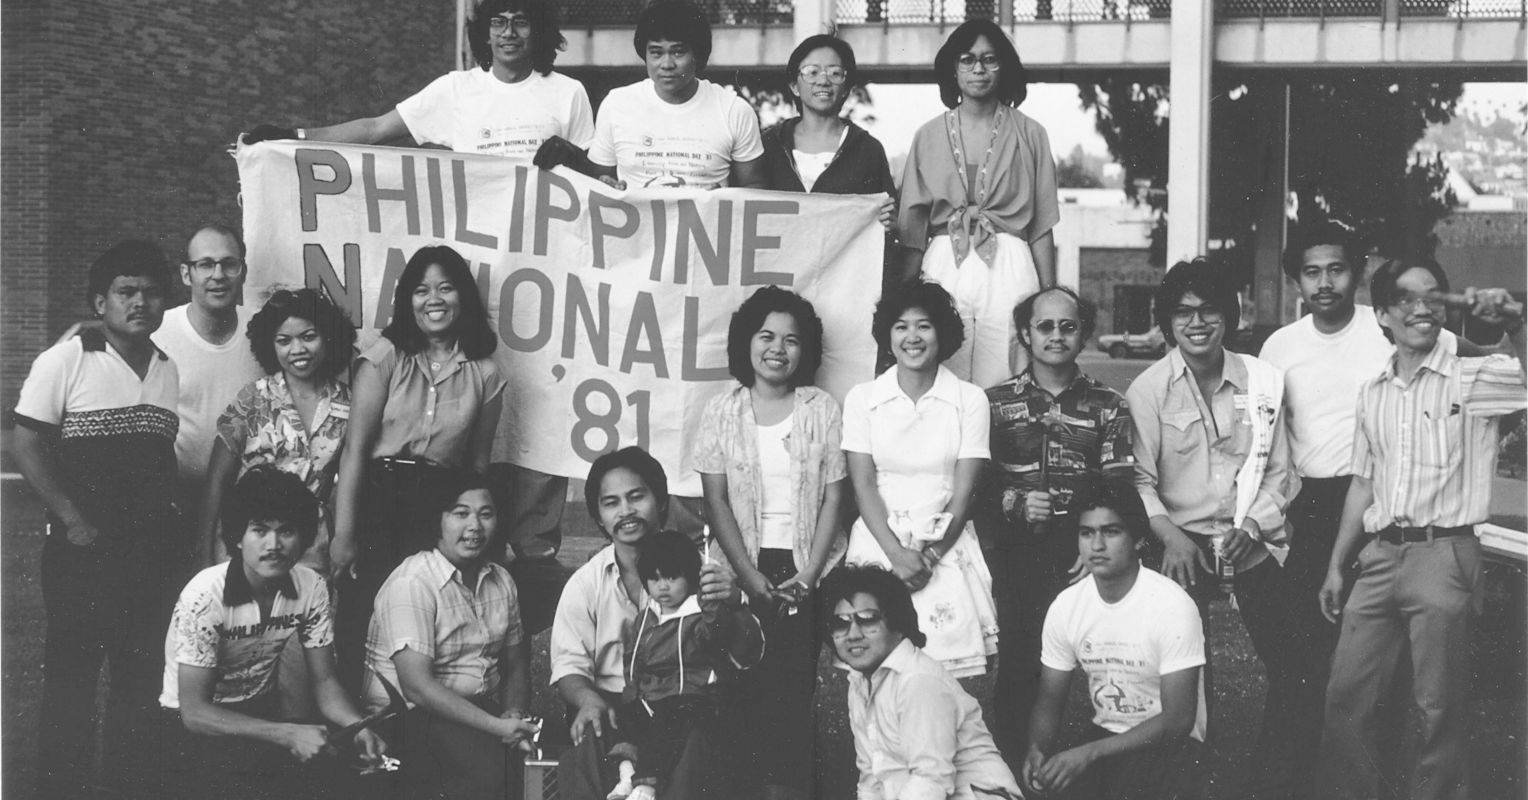 www.psychologytoday.com: Making History During Filipino American History Month